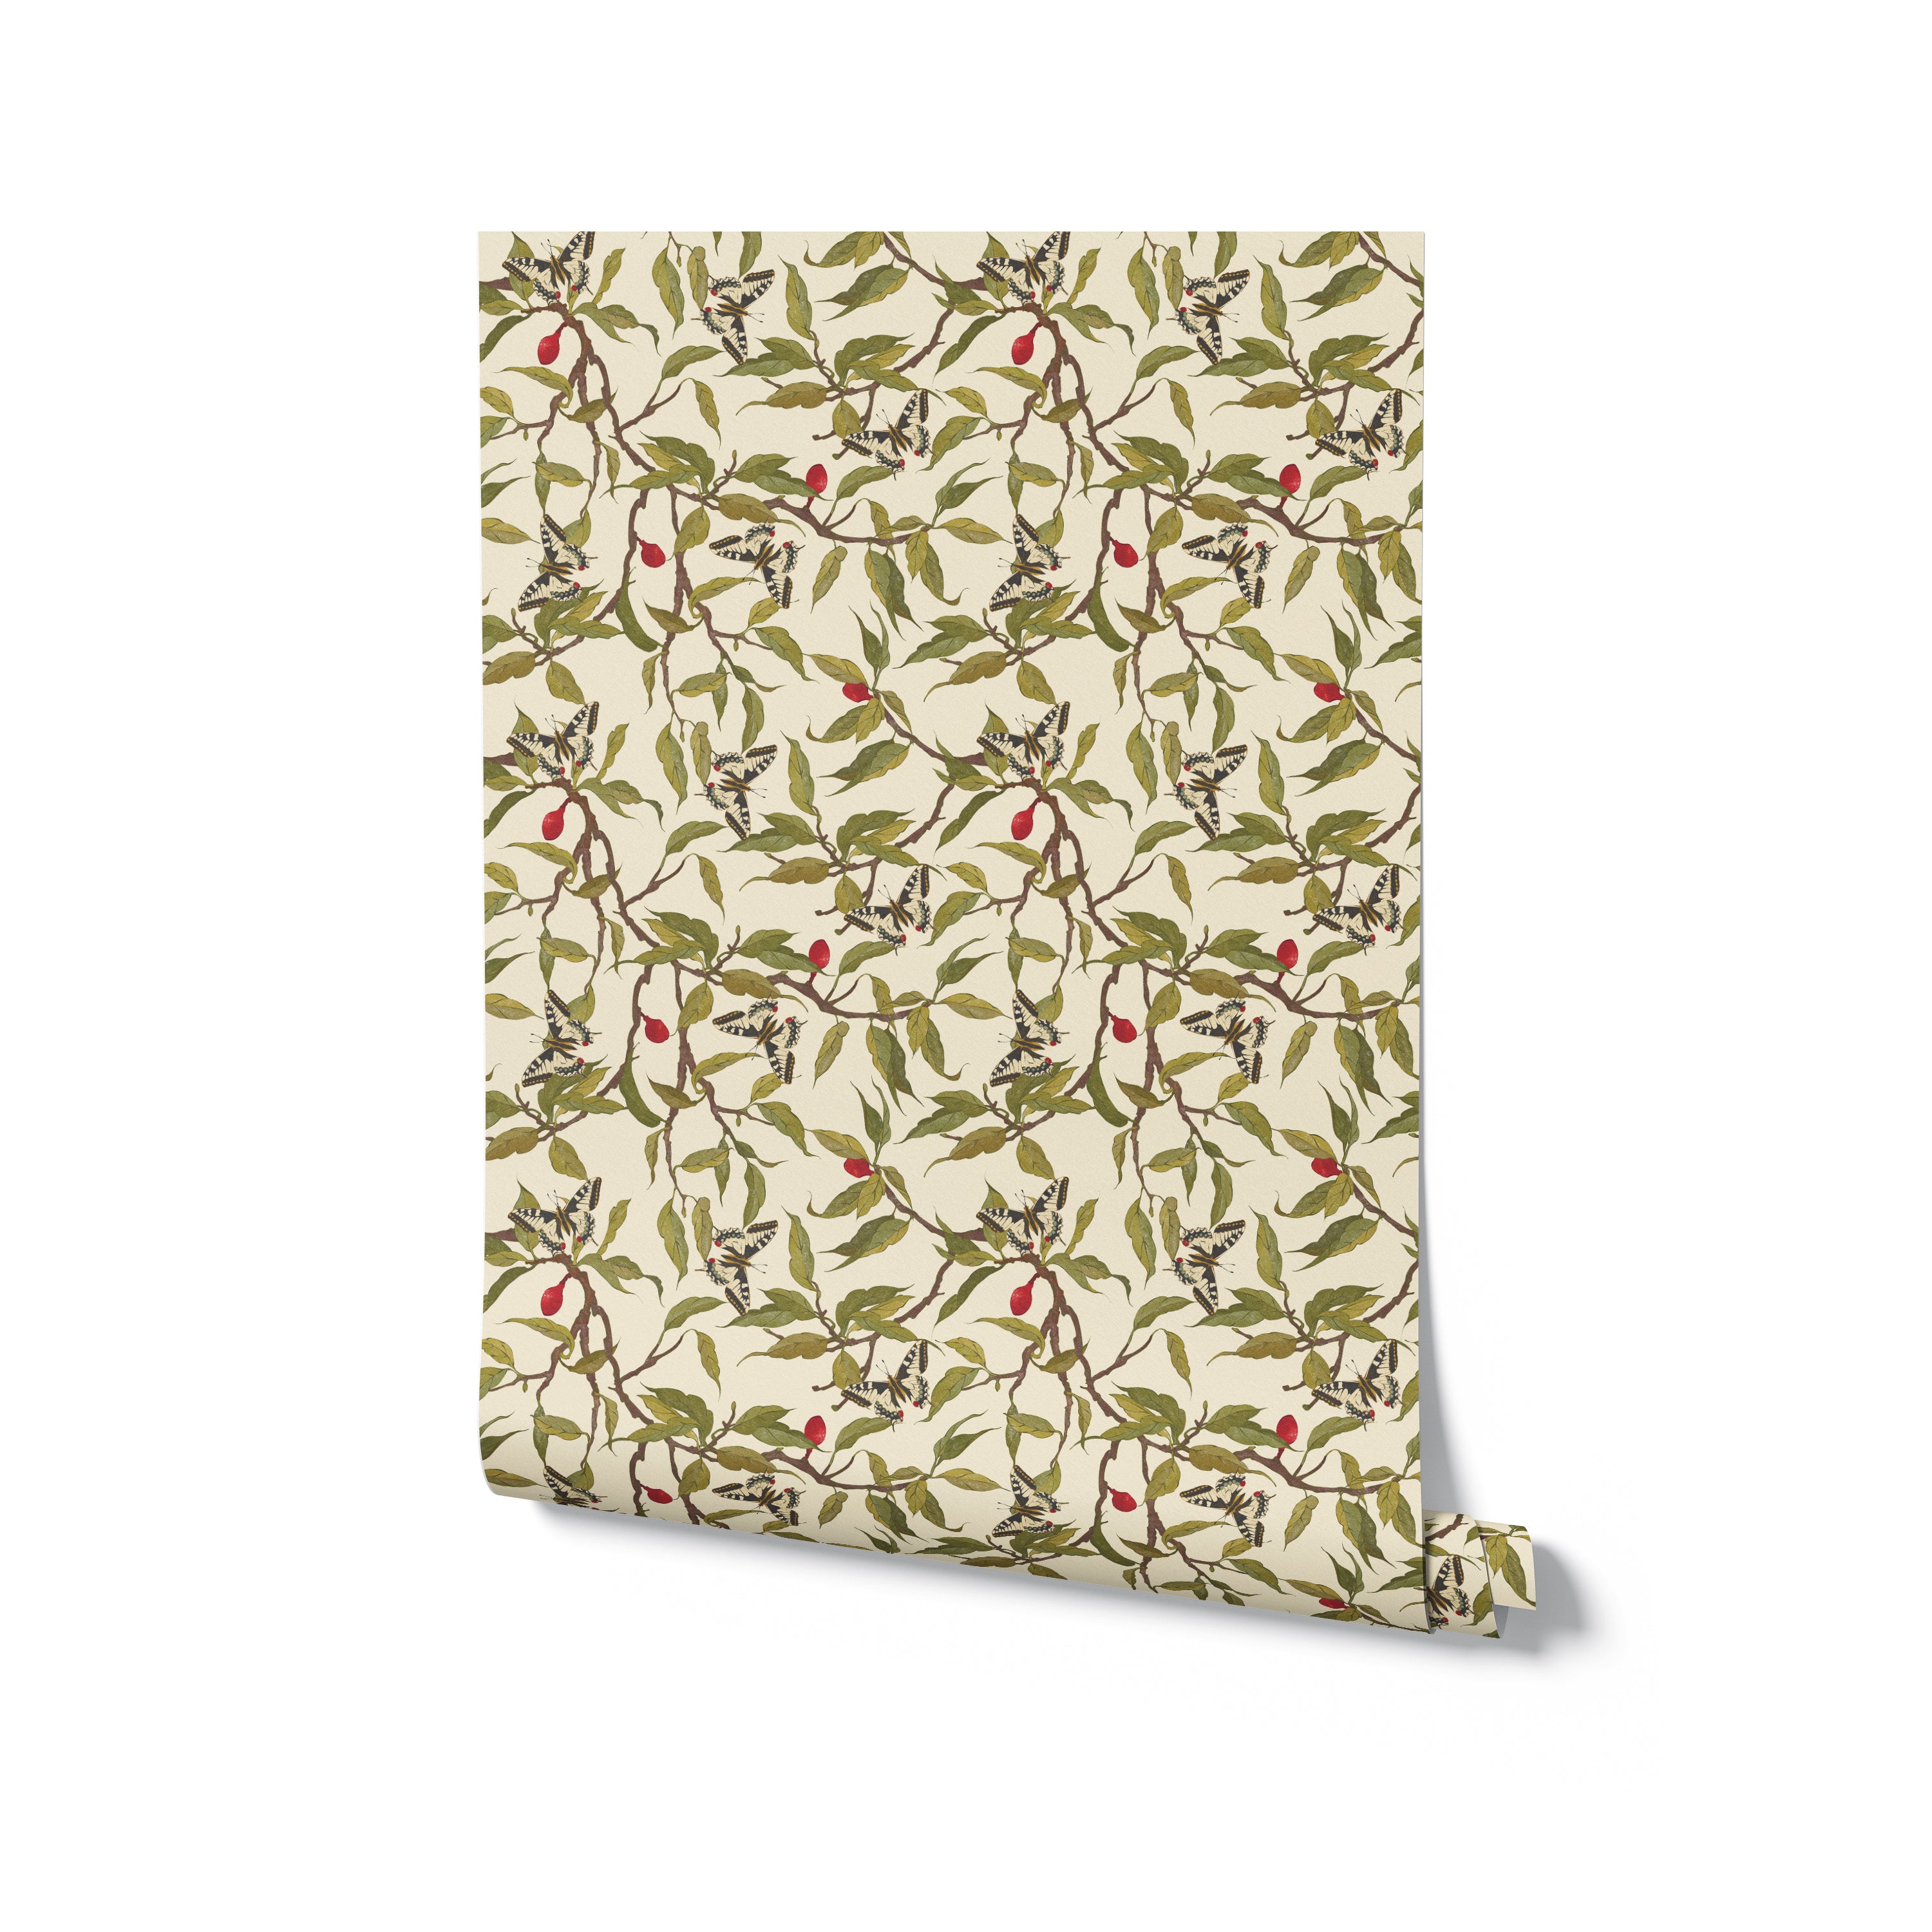 A roll of Vintage Garden Wallpaper displayed upright, highlighting its beautiful green leaves, red berries, and butterflies on a cream background. This wallpaper is ideal for adding a natural and sophisticated touch to any interior decor.